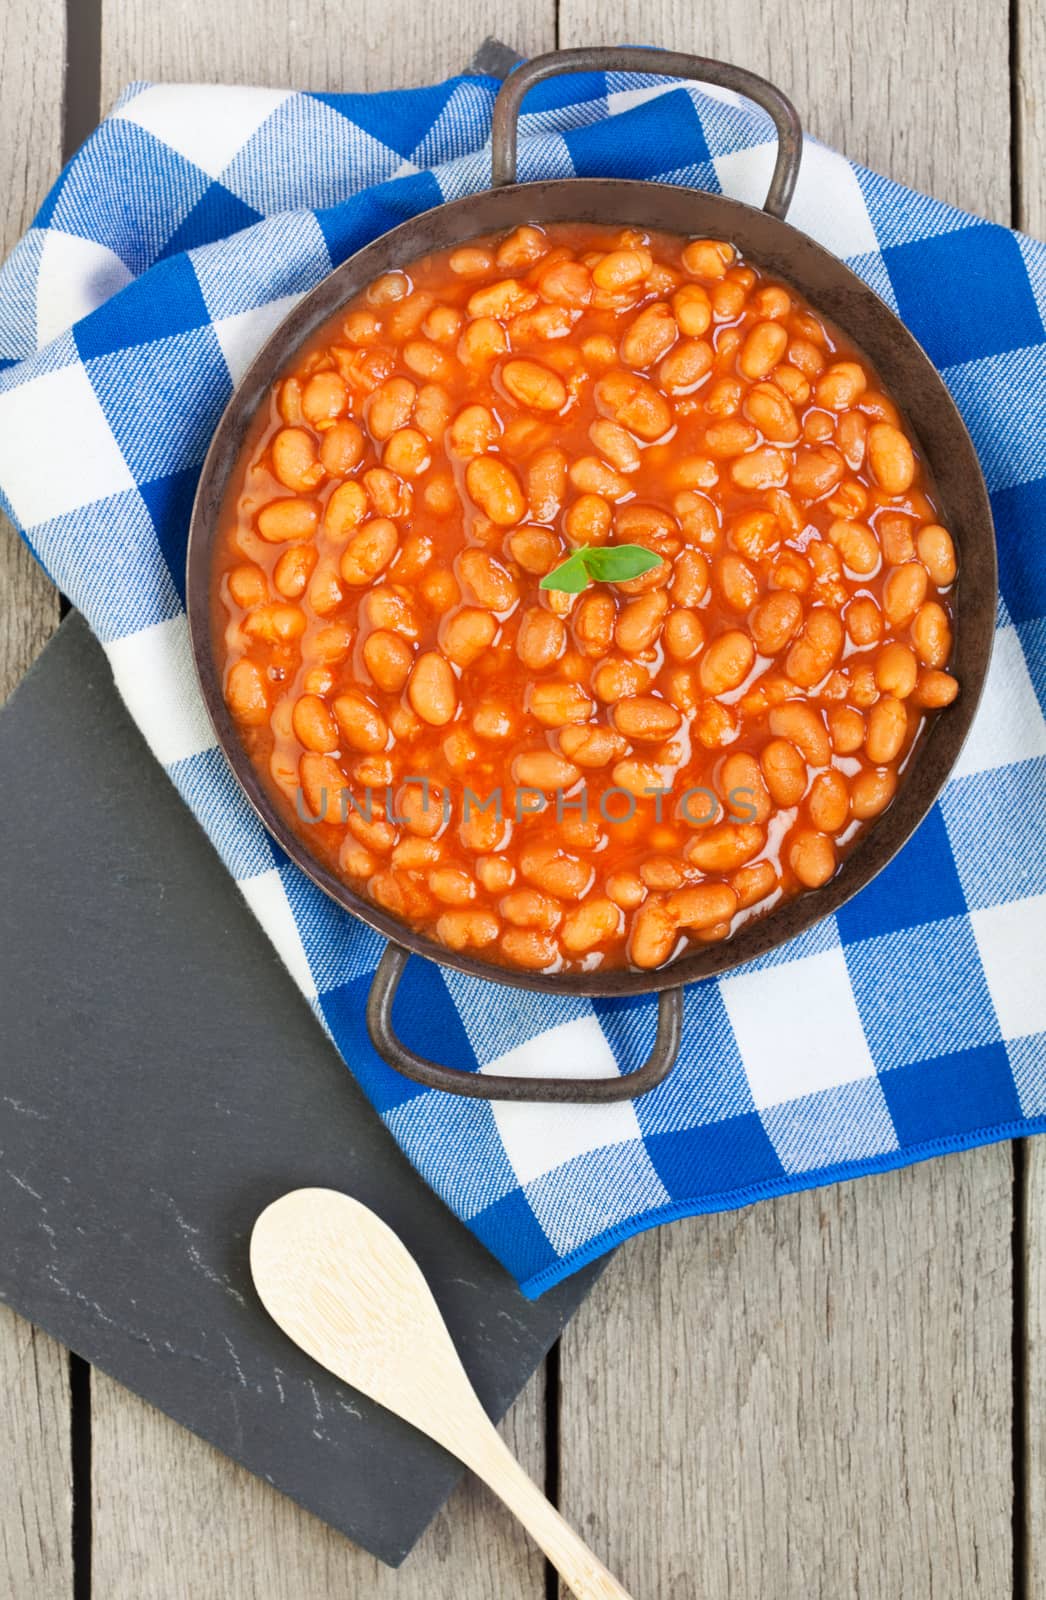 Baked Beans by songbird839